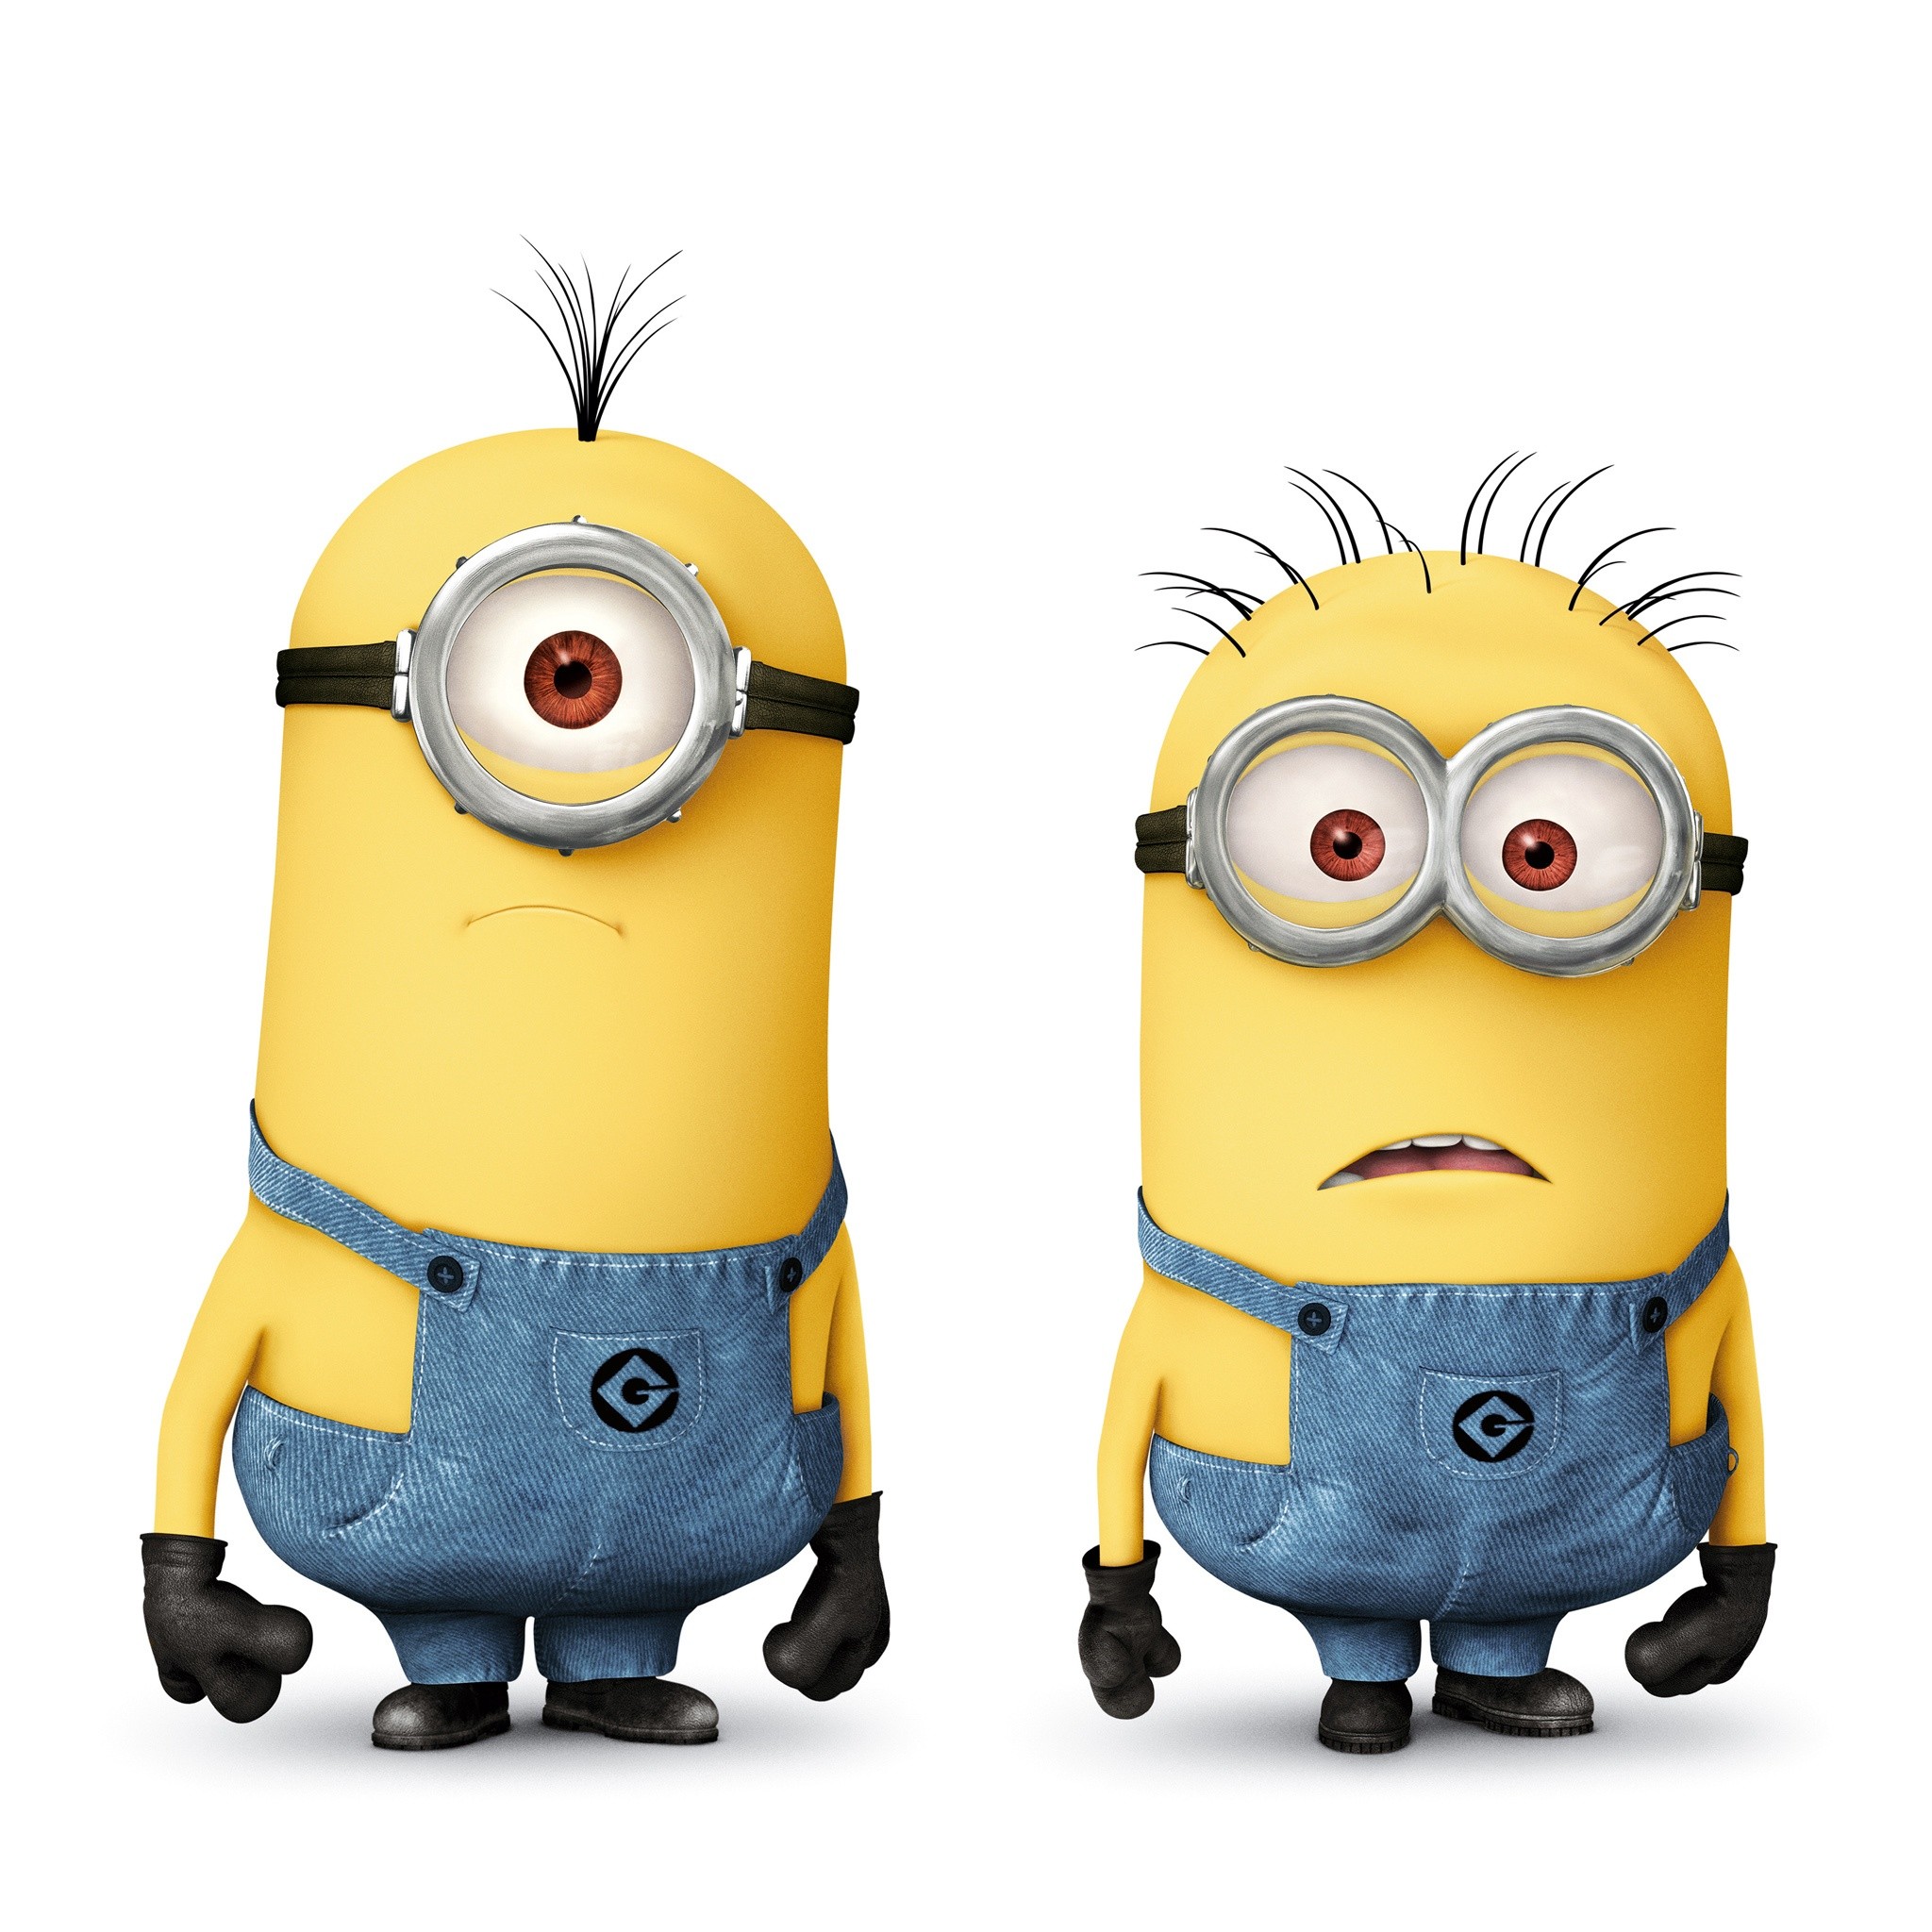 2048x2048 minions | Minions in Despicable Me 2 HD Wallpaper - iHD Wallpapers